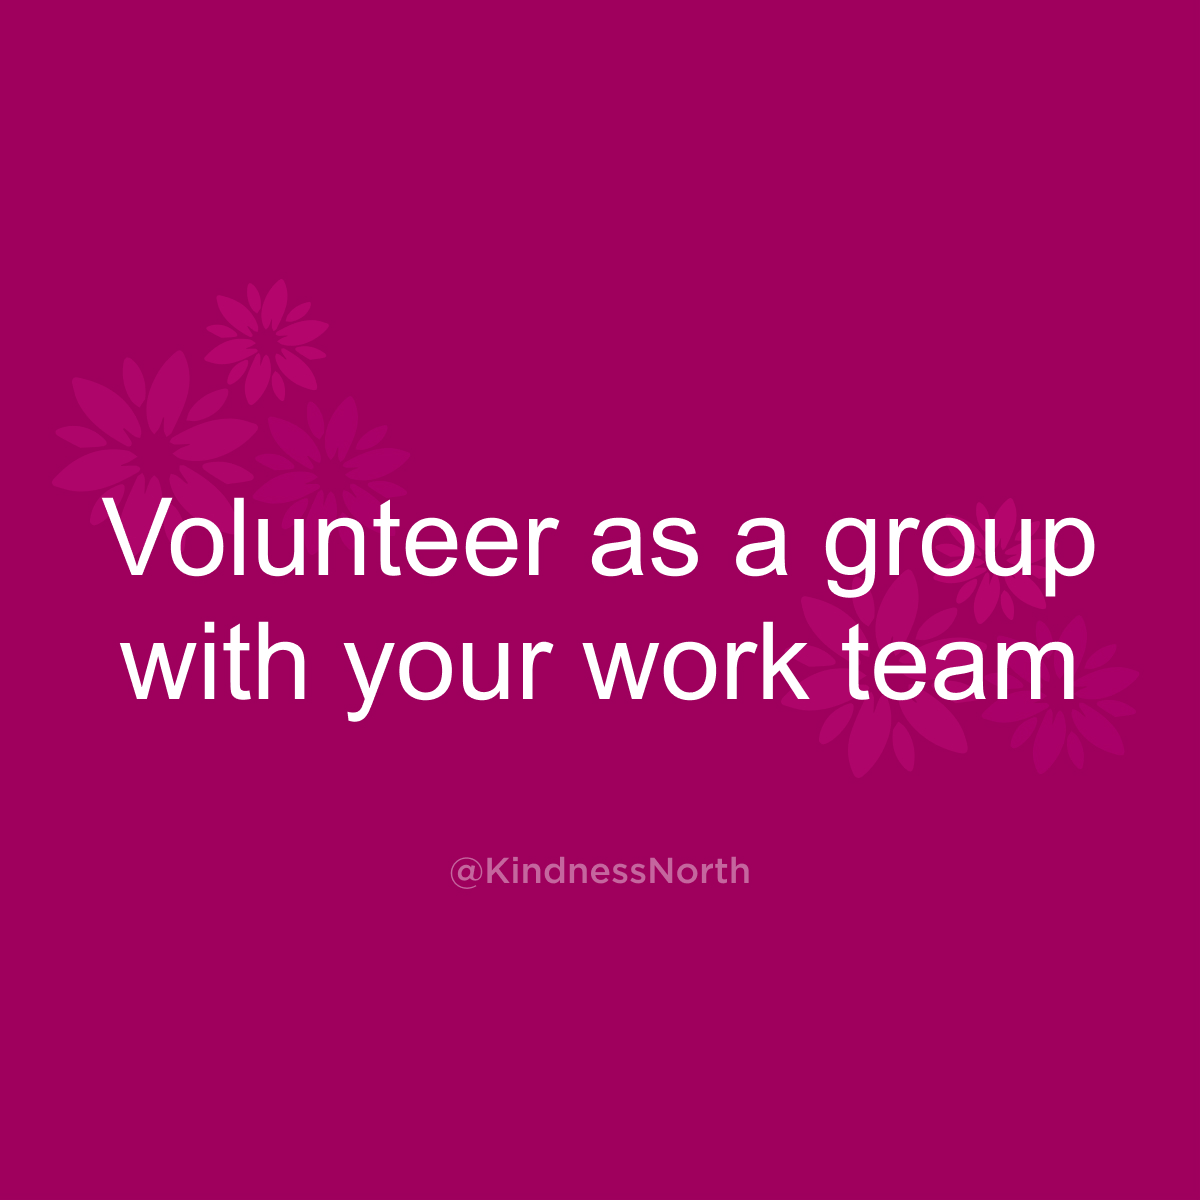 Volunteer as a group with your work team